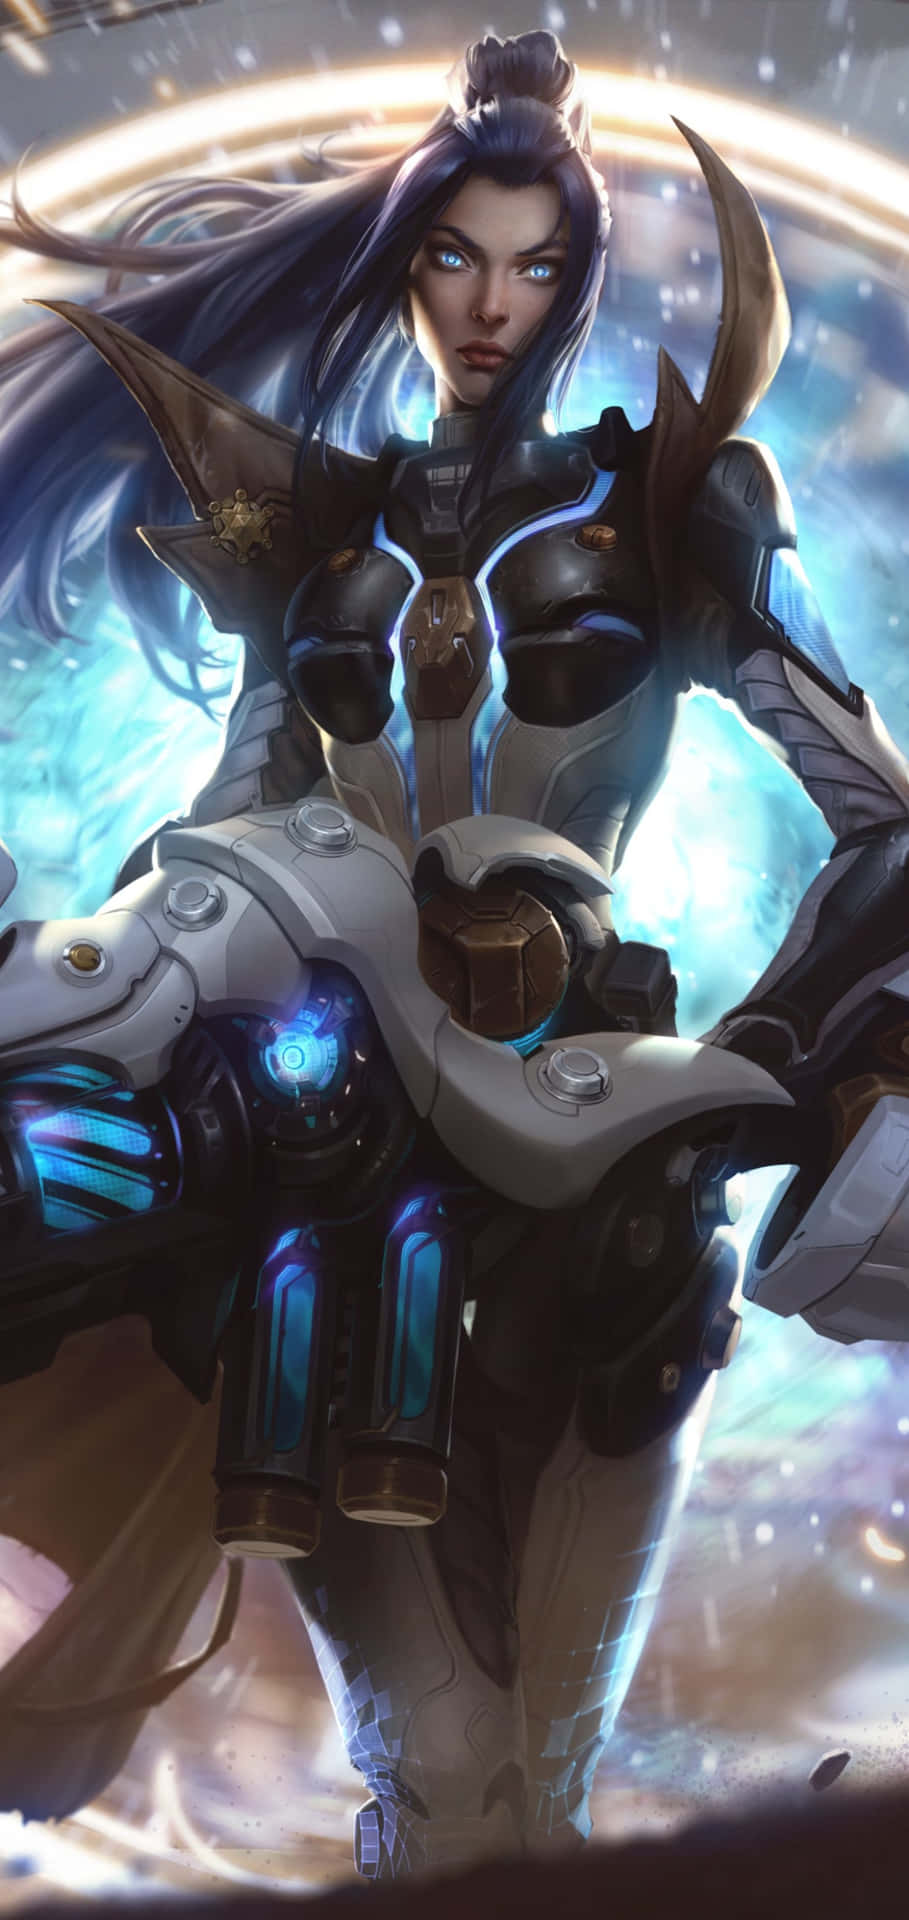 A Female Character In League Of Legends Holding A Gun